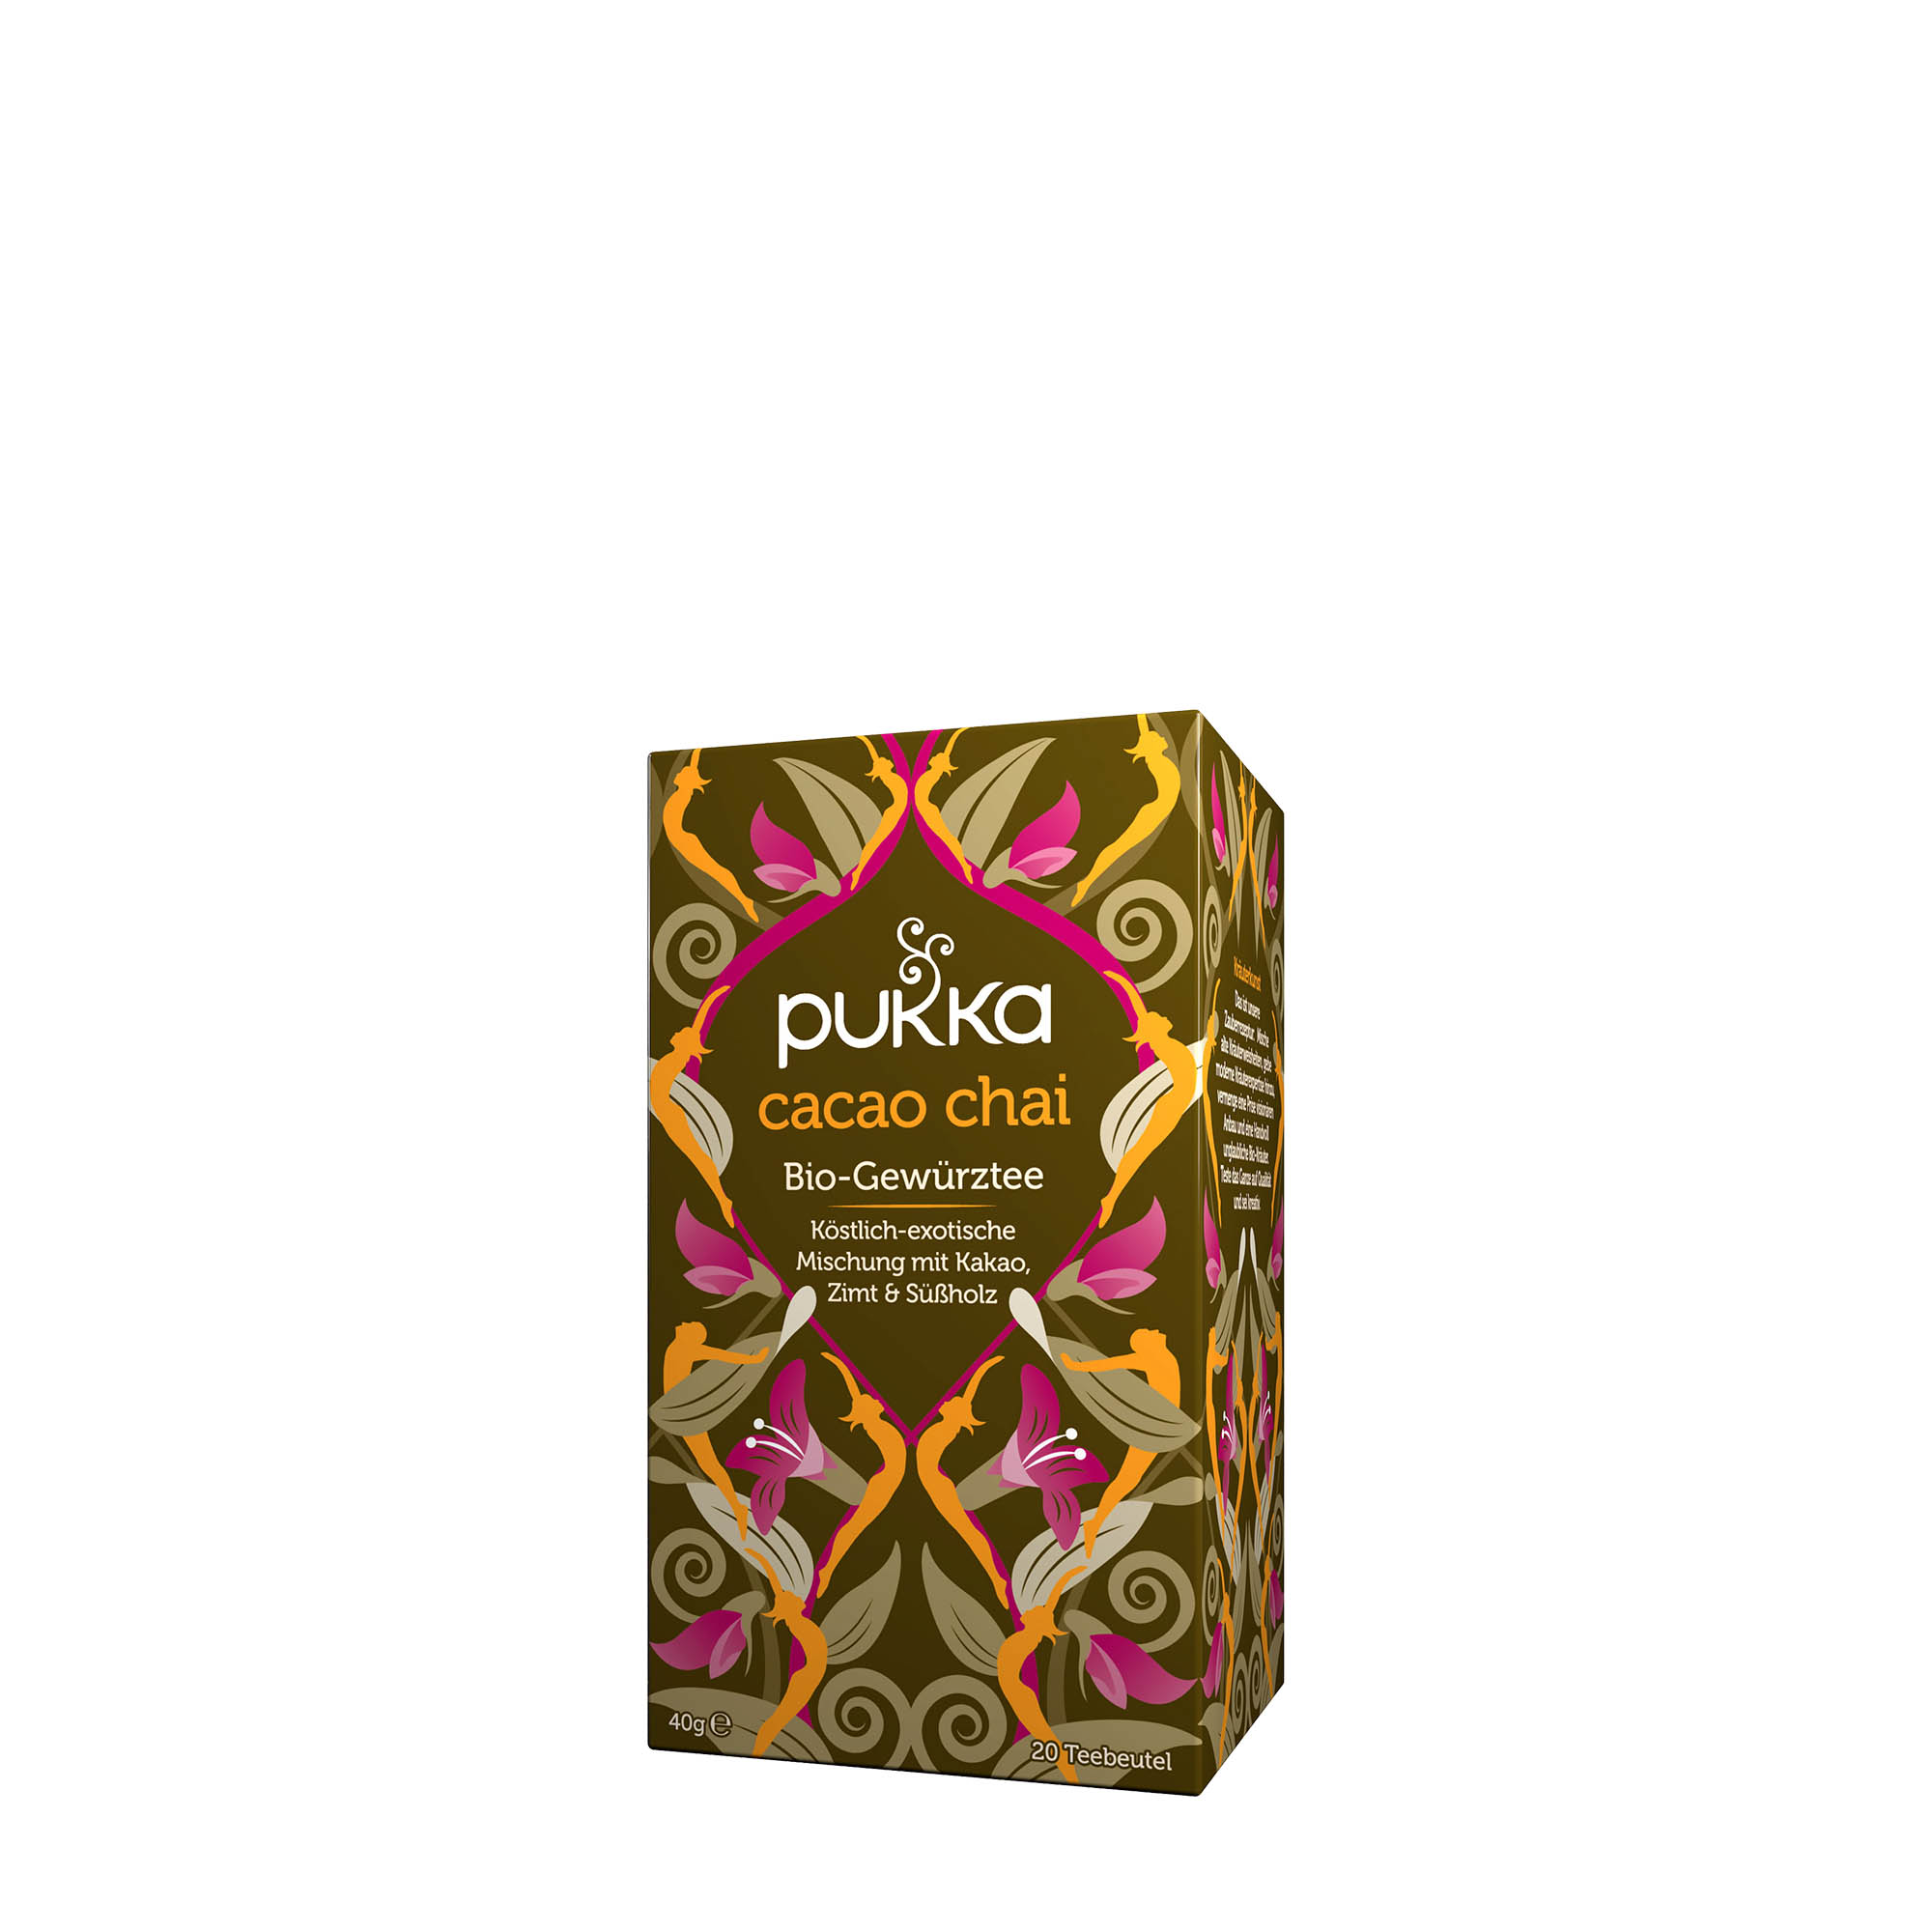 https://pepperyspot.com/wp-content/uploads/2023/08/pukka-spiced-tea-cacao-chai-delicious-exotic-blend-with-cocoa-cinnamon-licorice-20-count.jpg